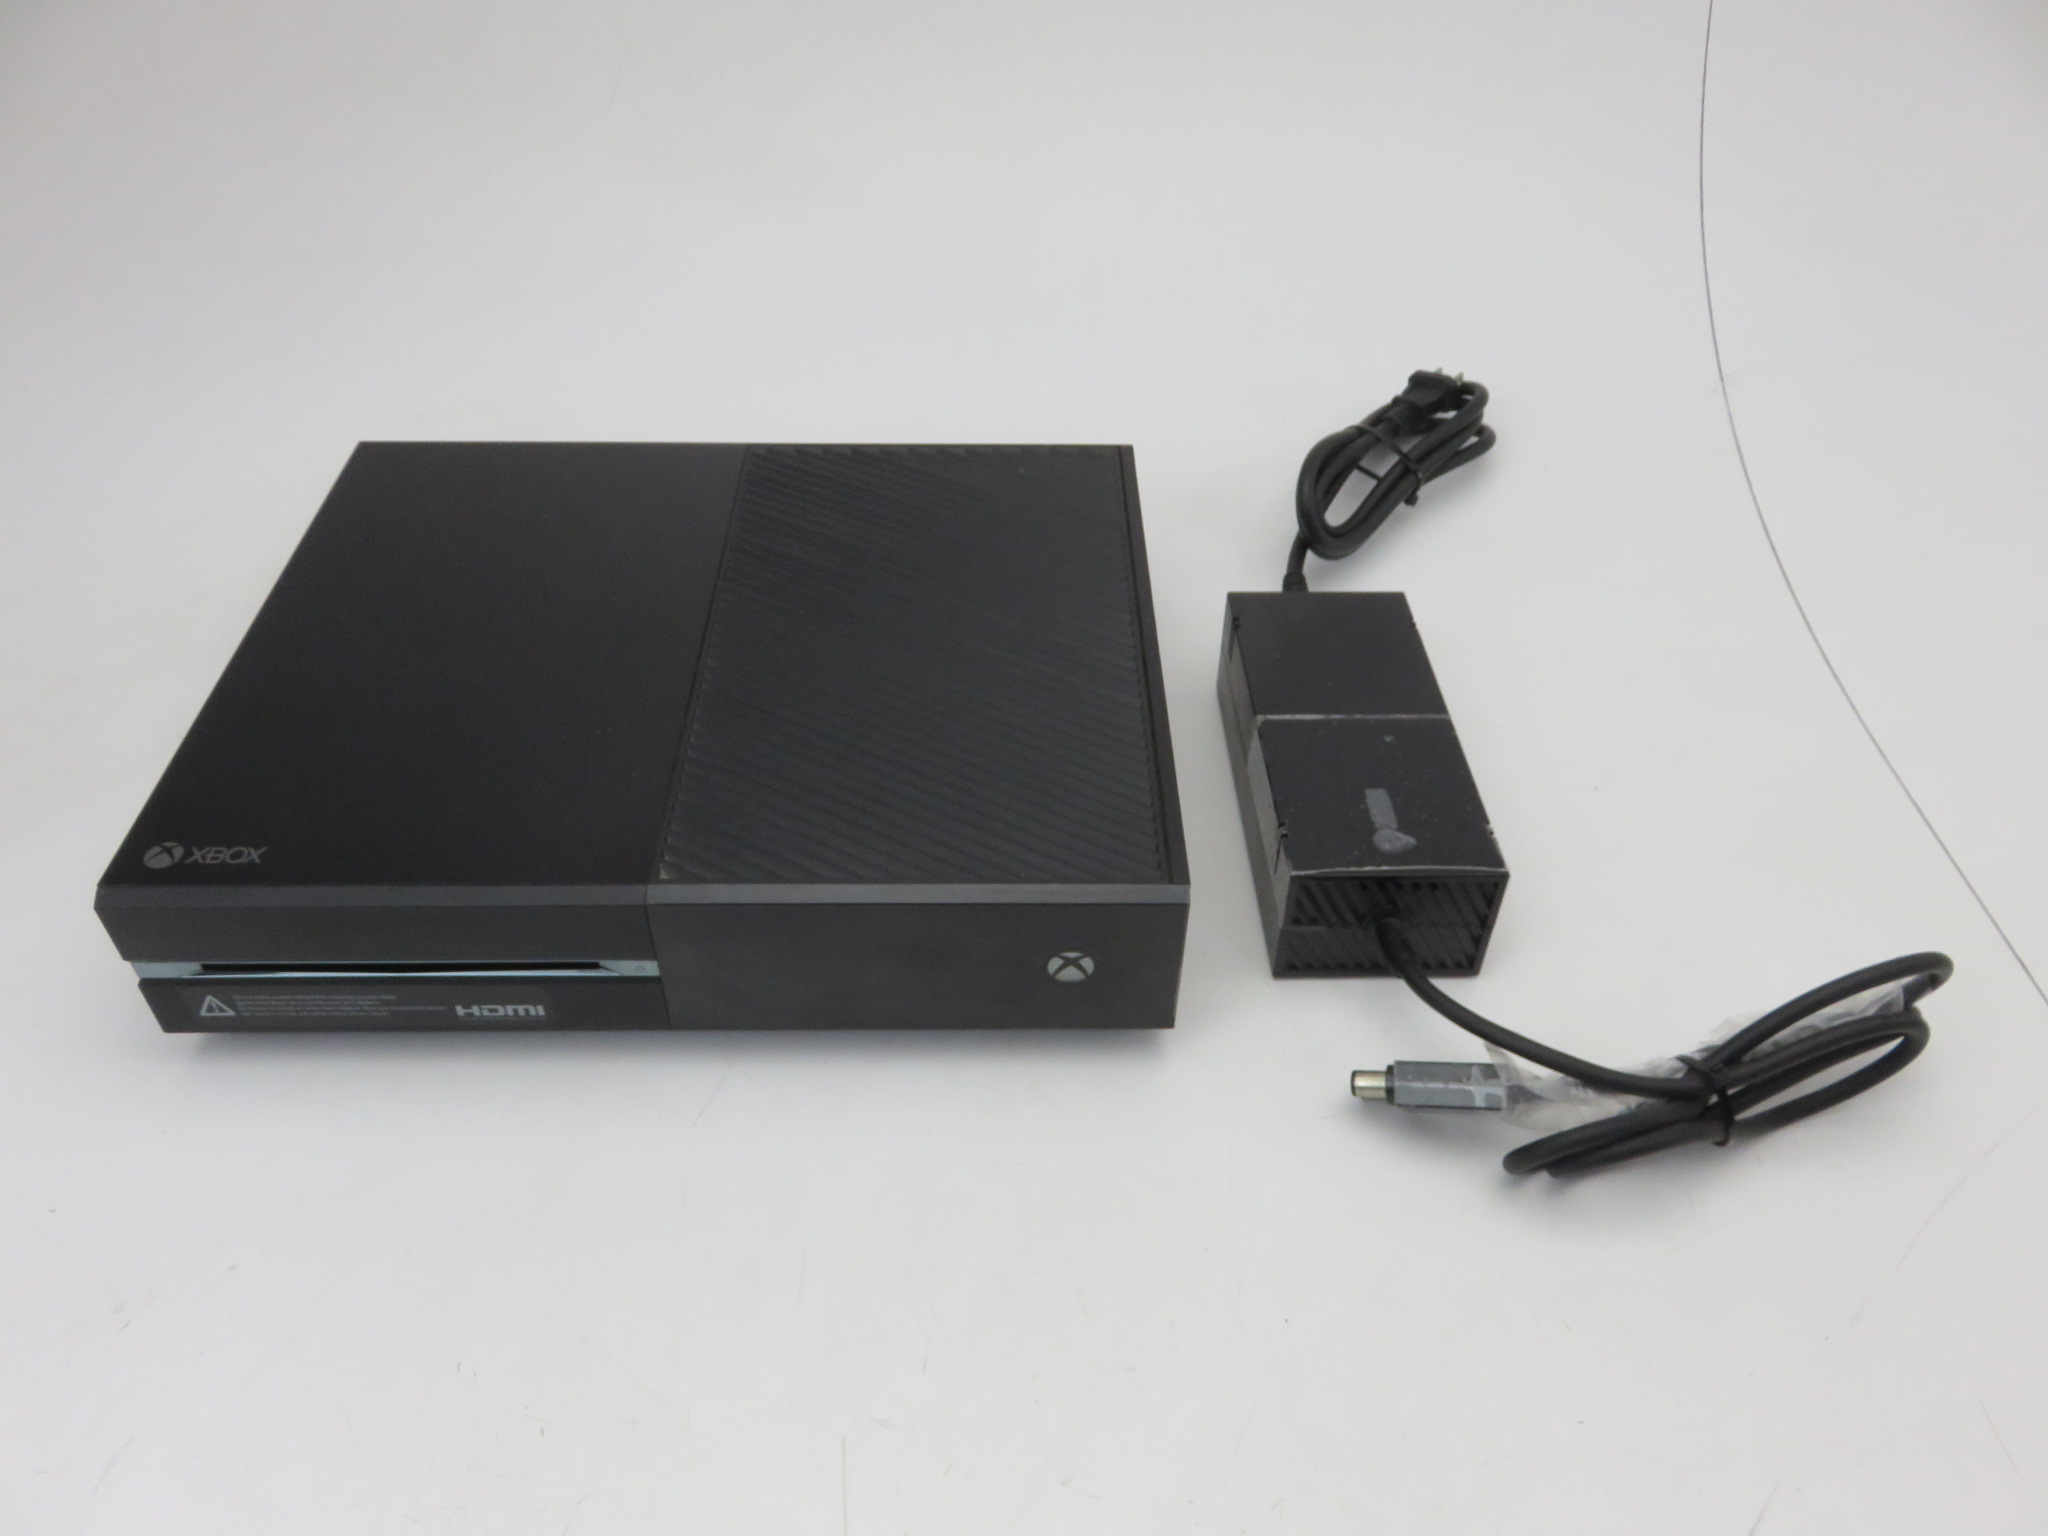 xbox one model 1540 with kinect